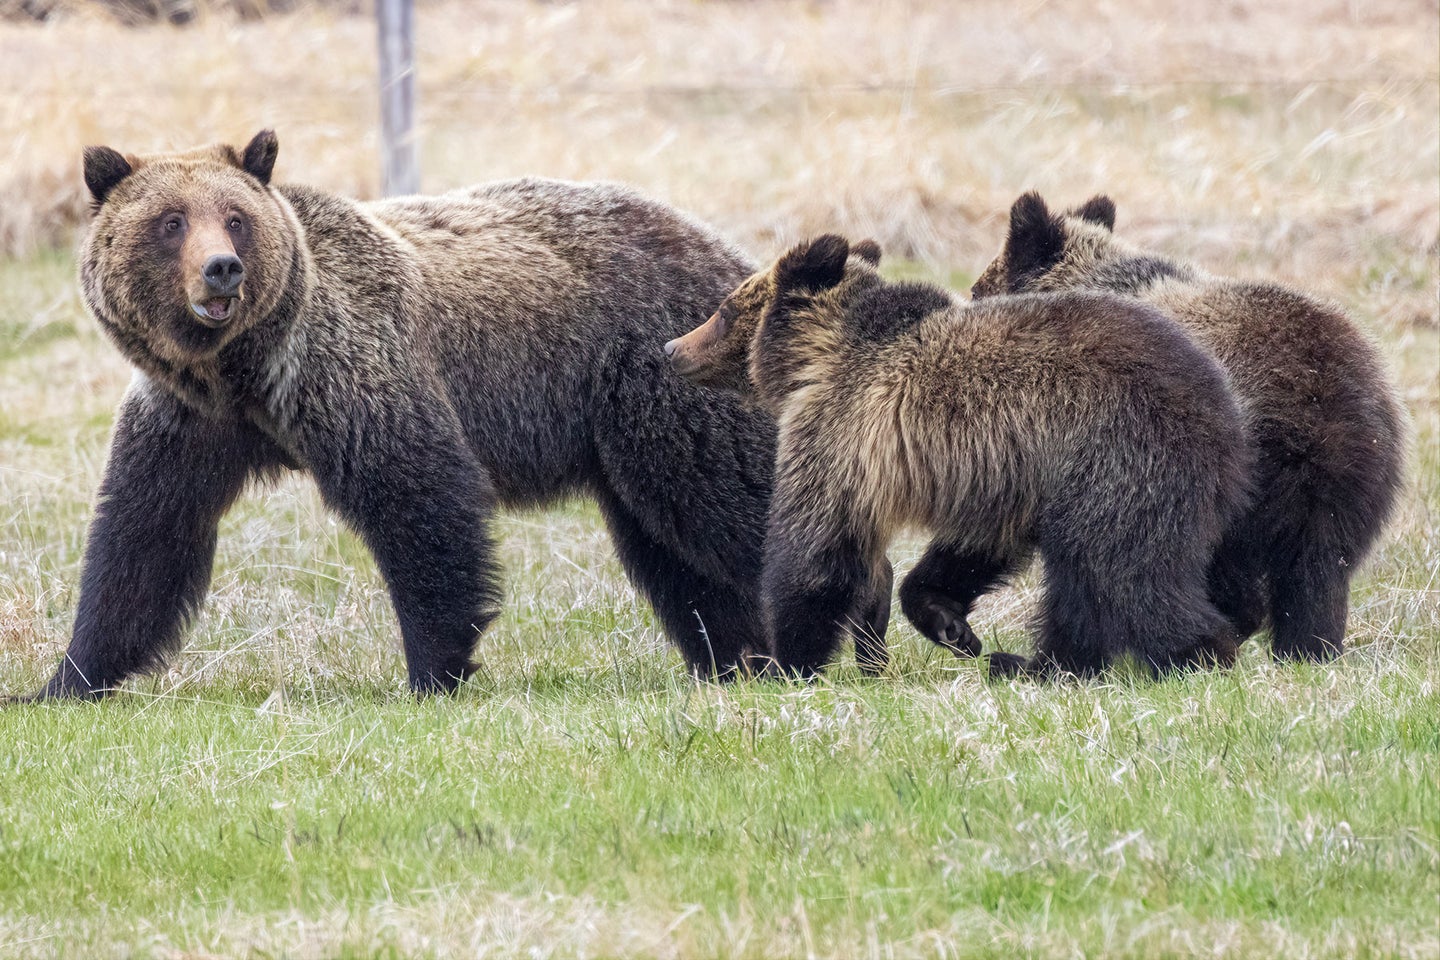 A grizzly bear and two cubs in a field.